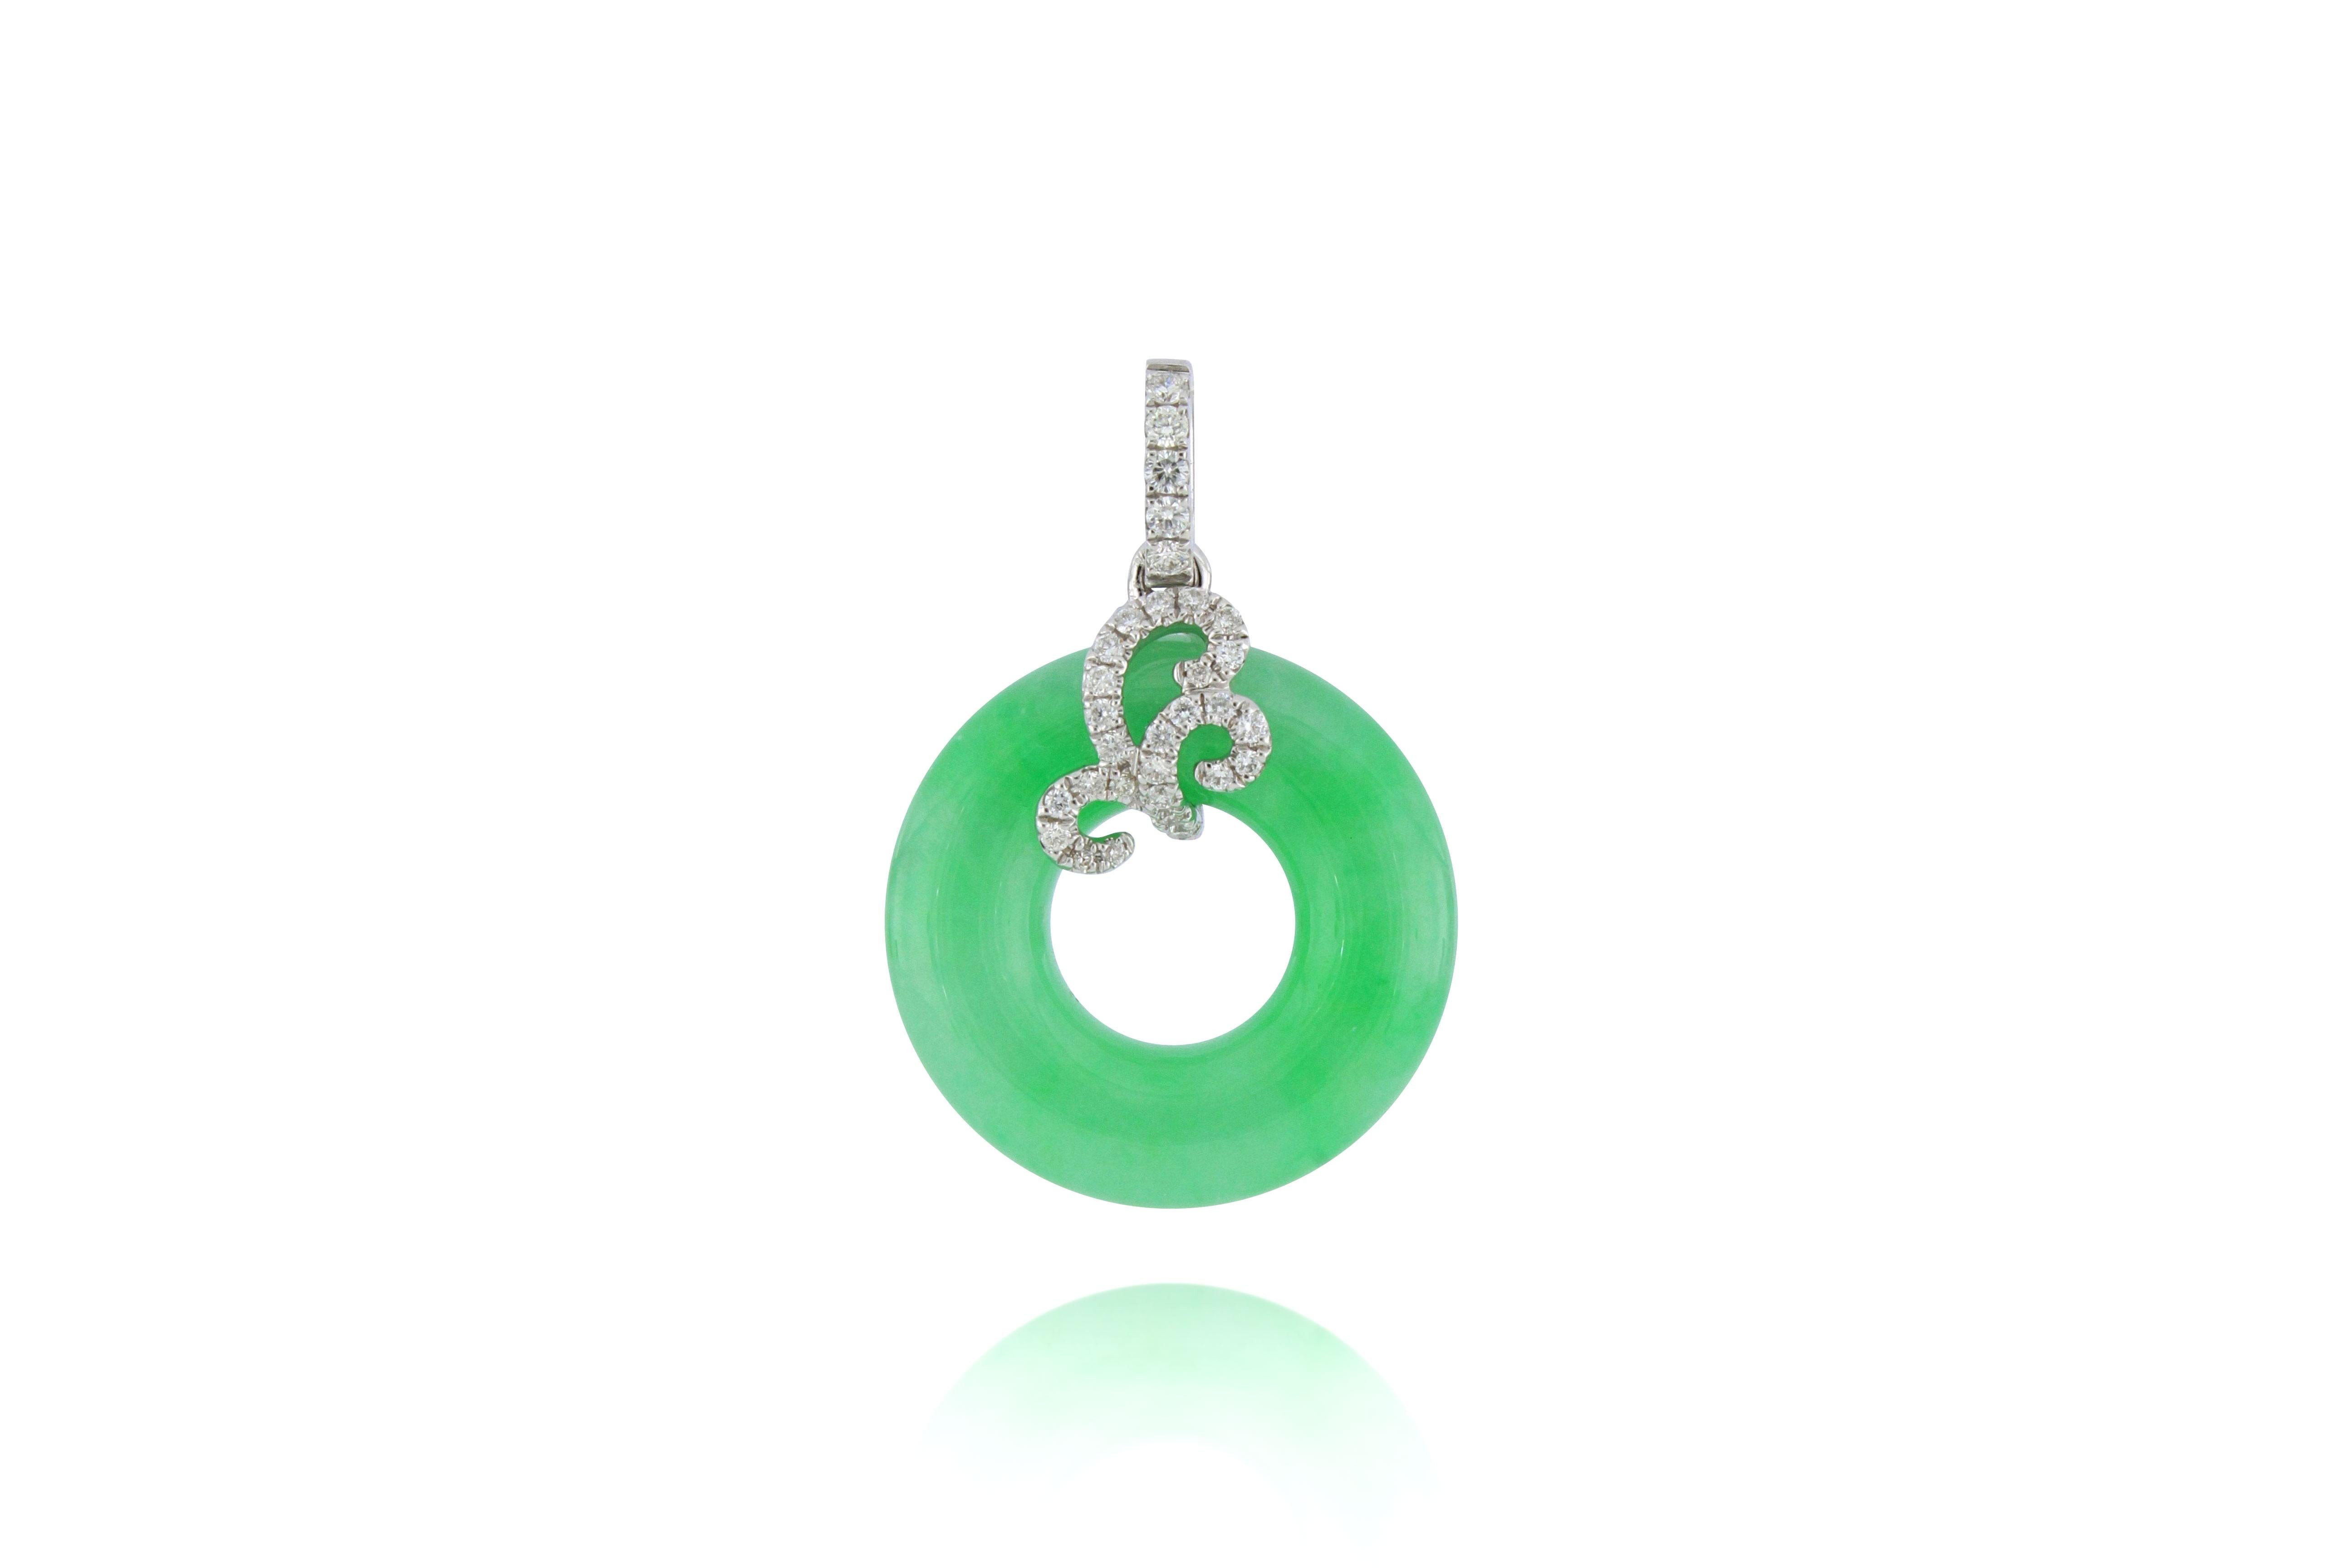 A translucent bright green natural jadeite pendant in perfect round shape, decorated with round brilliant-cut diamonds, weighing 0.178 carats in total, mounted in 18 karat white gold. 
The company was founded one and a half centuries ago in Macau.